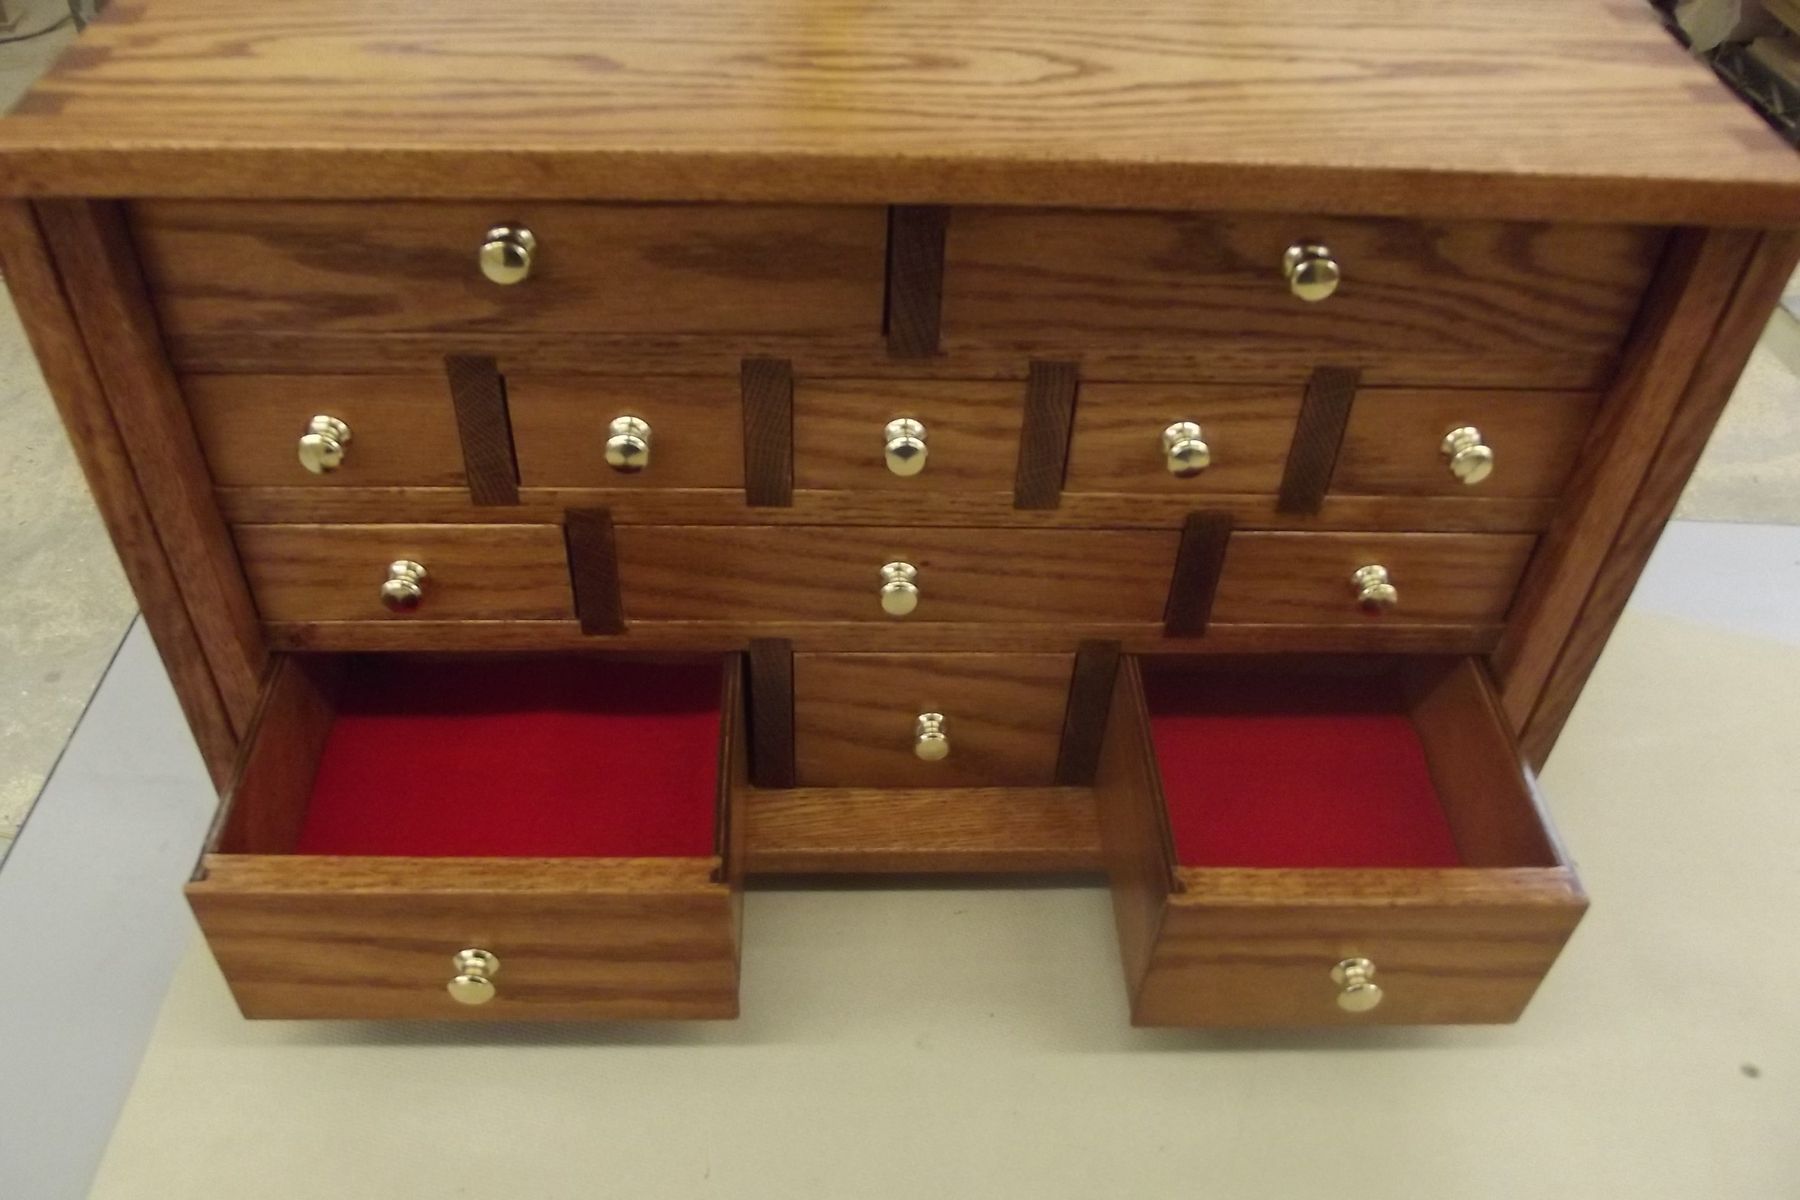 Handmade Locking MultiDrawer (Or Apothecary Style) Jewelry Box by